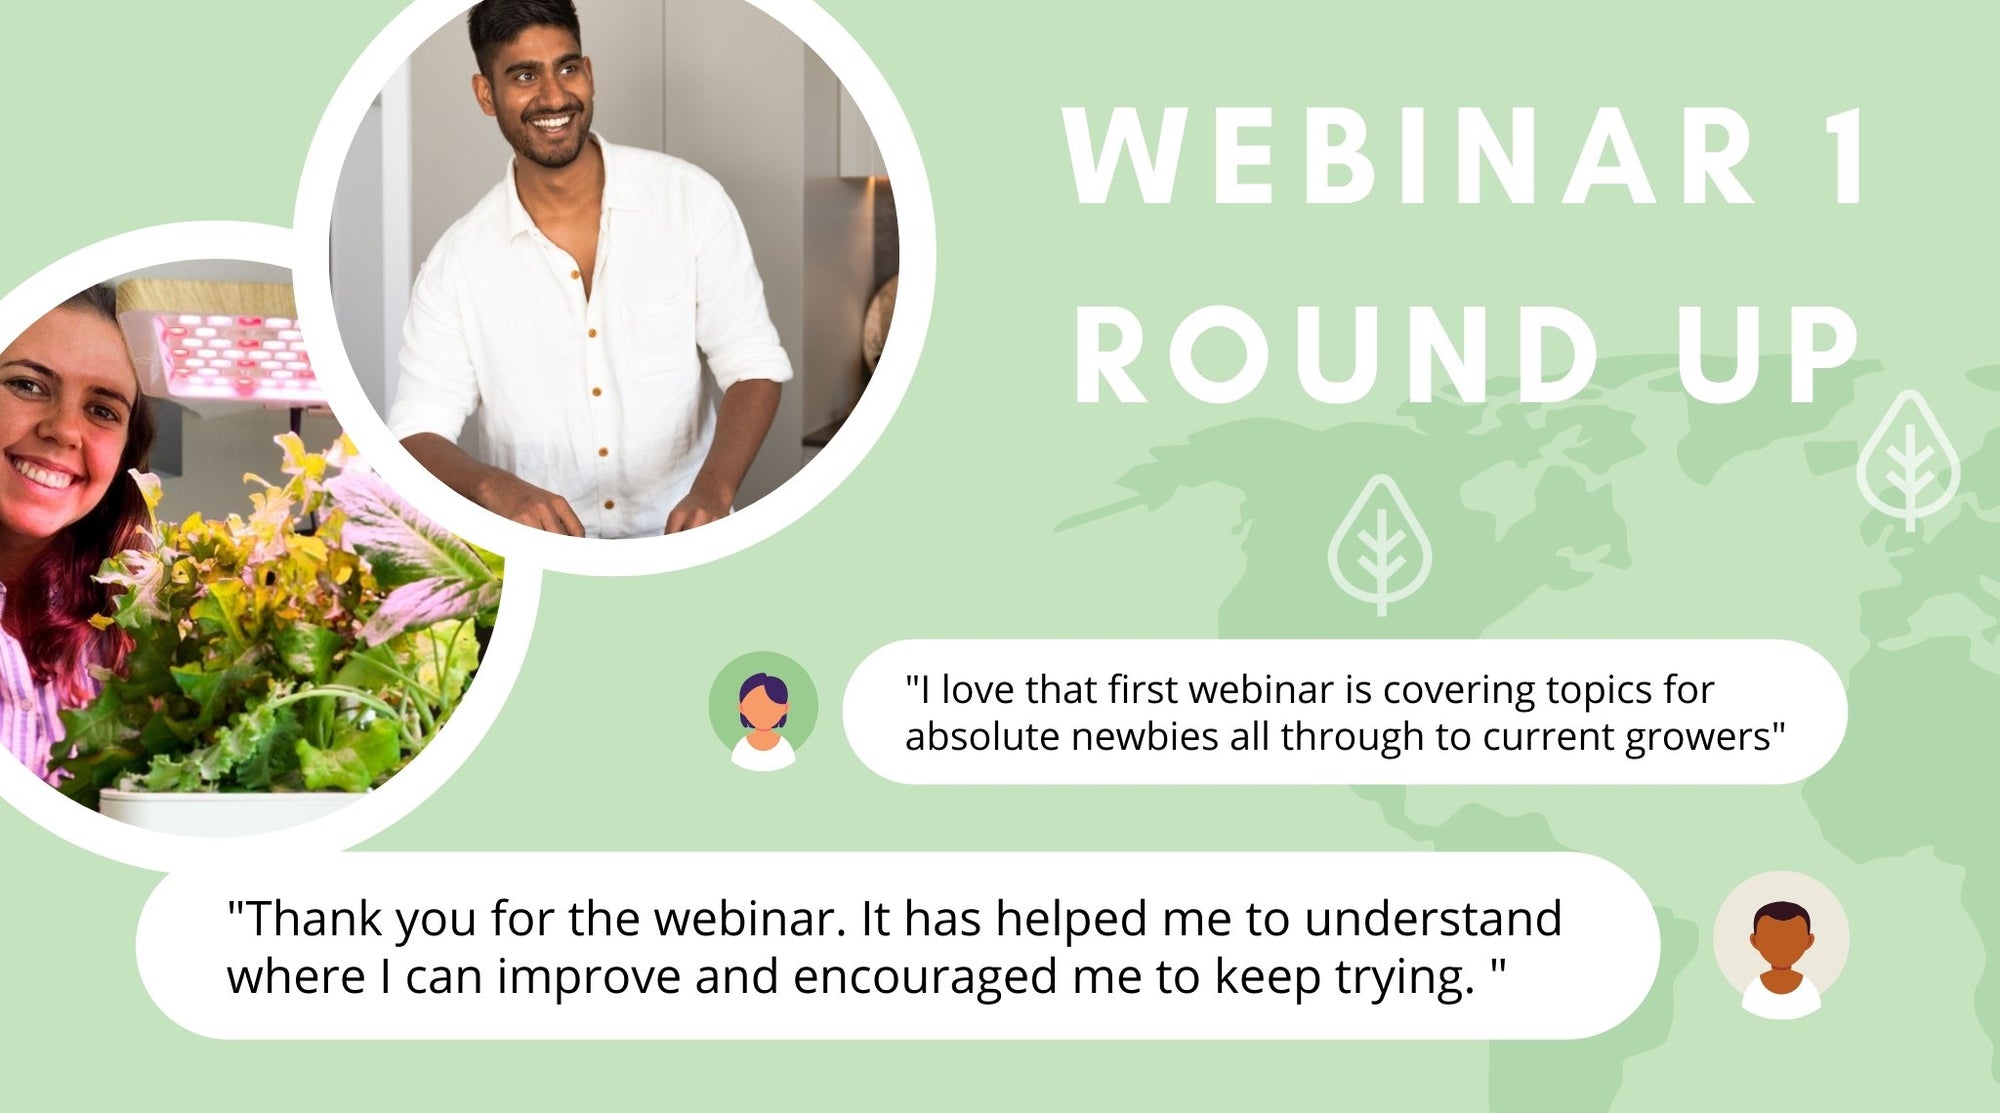 Webinar 1 round up map hosts and feedback messages